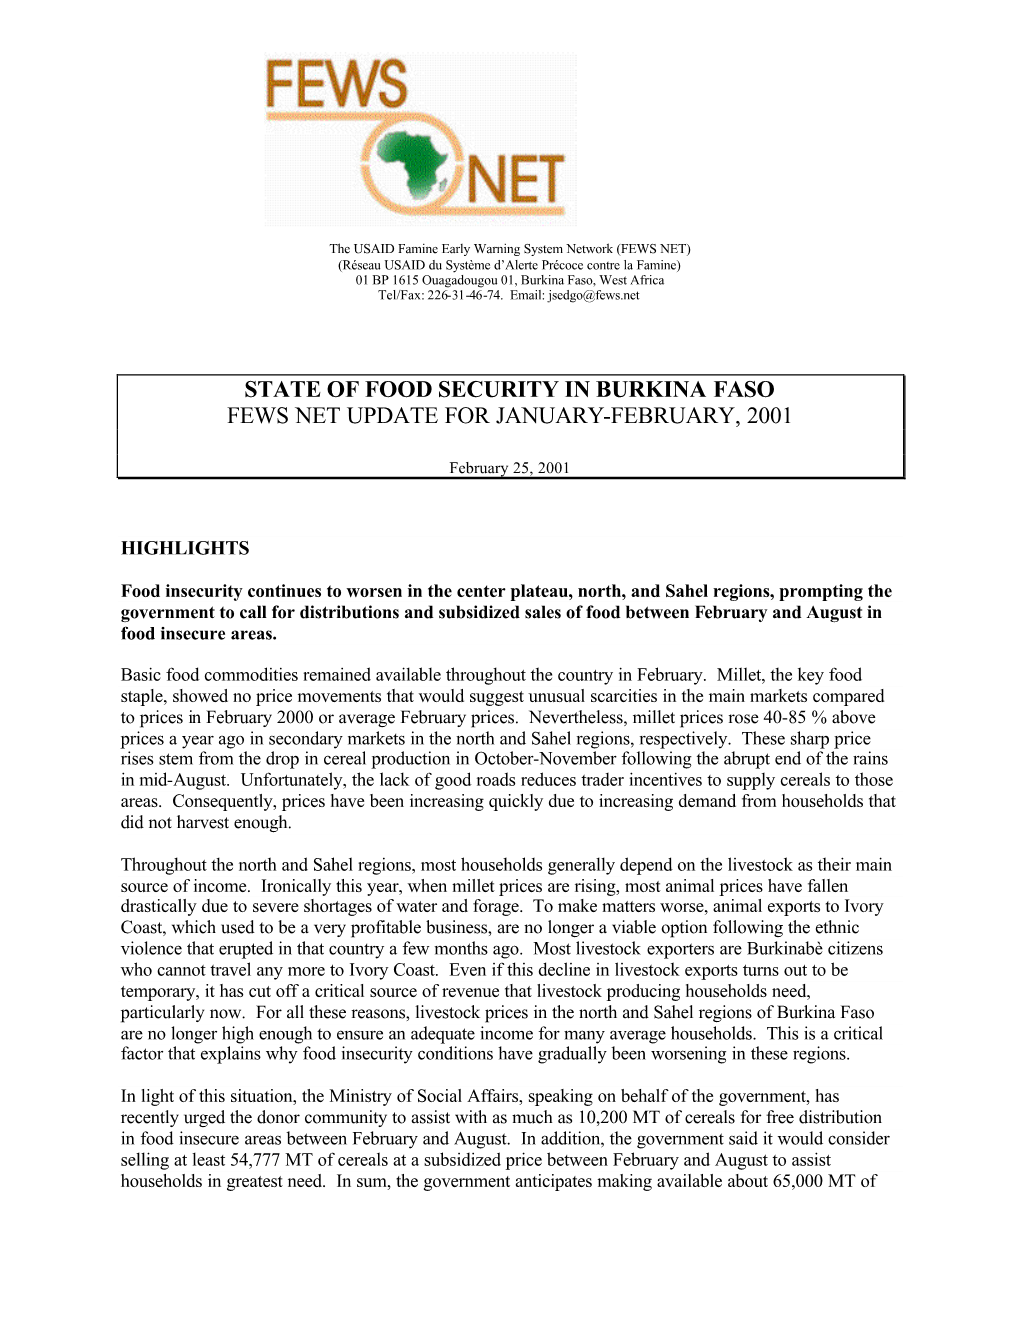 State of Food Security in Burkina Faso Fews Net Update for January-February, 2001